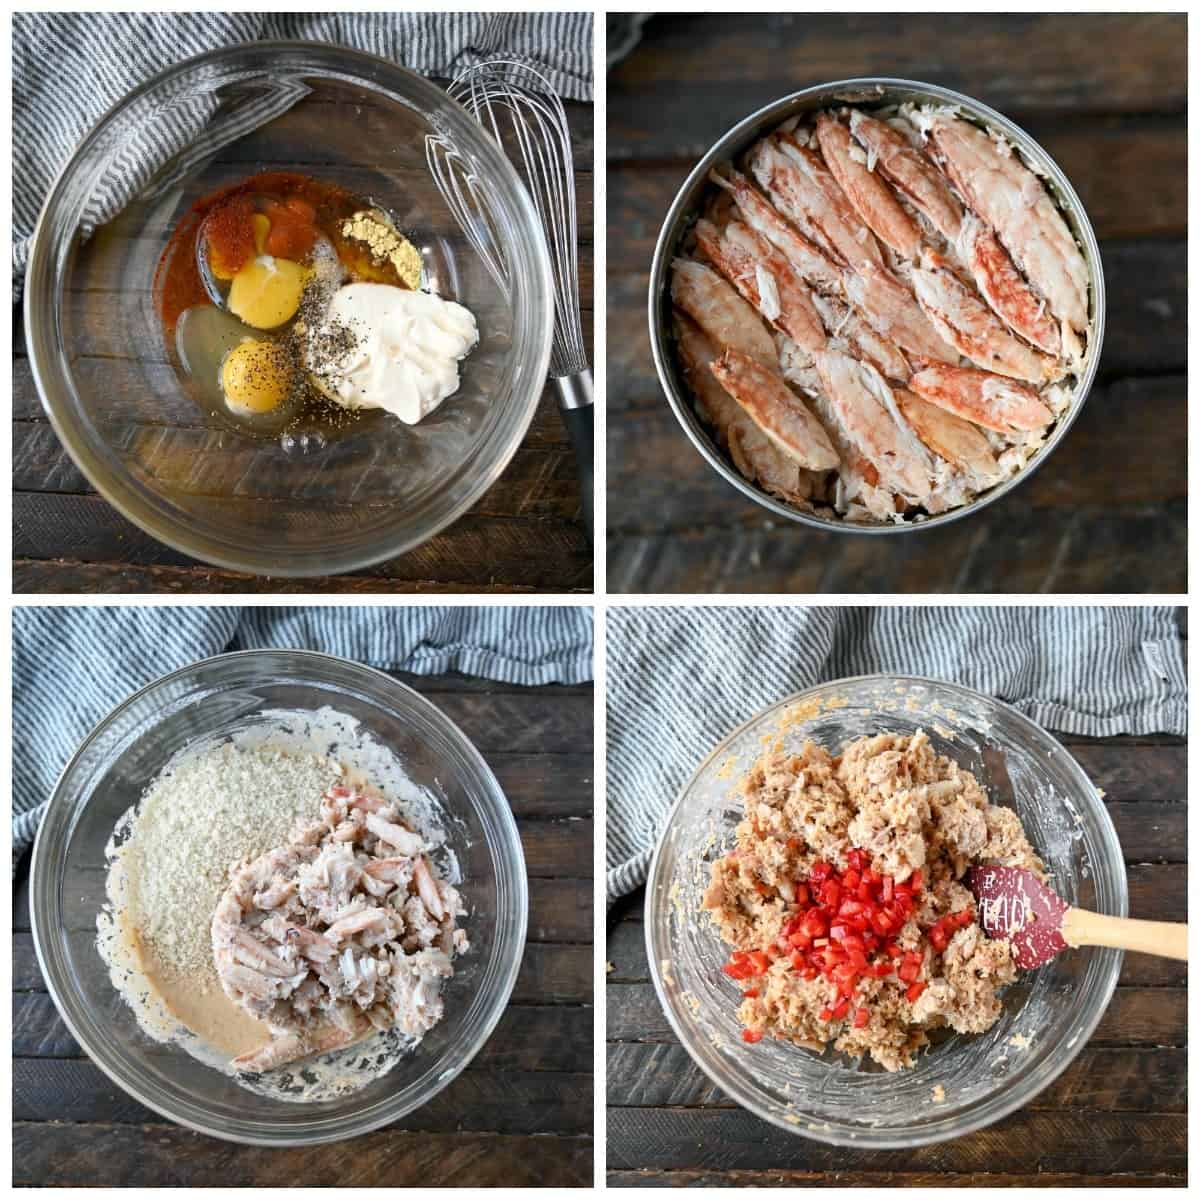 Four process photos. First one, wet ingredients in a medium bowl. Second one, crab meat in a can. Third one, dry ingredients added to the wet ingredients. Fourth one, diced red peppers add into the bowl.